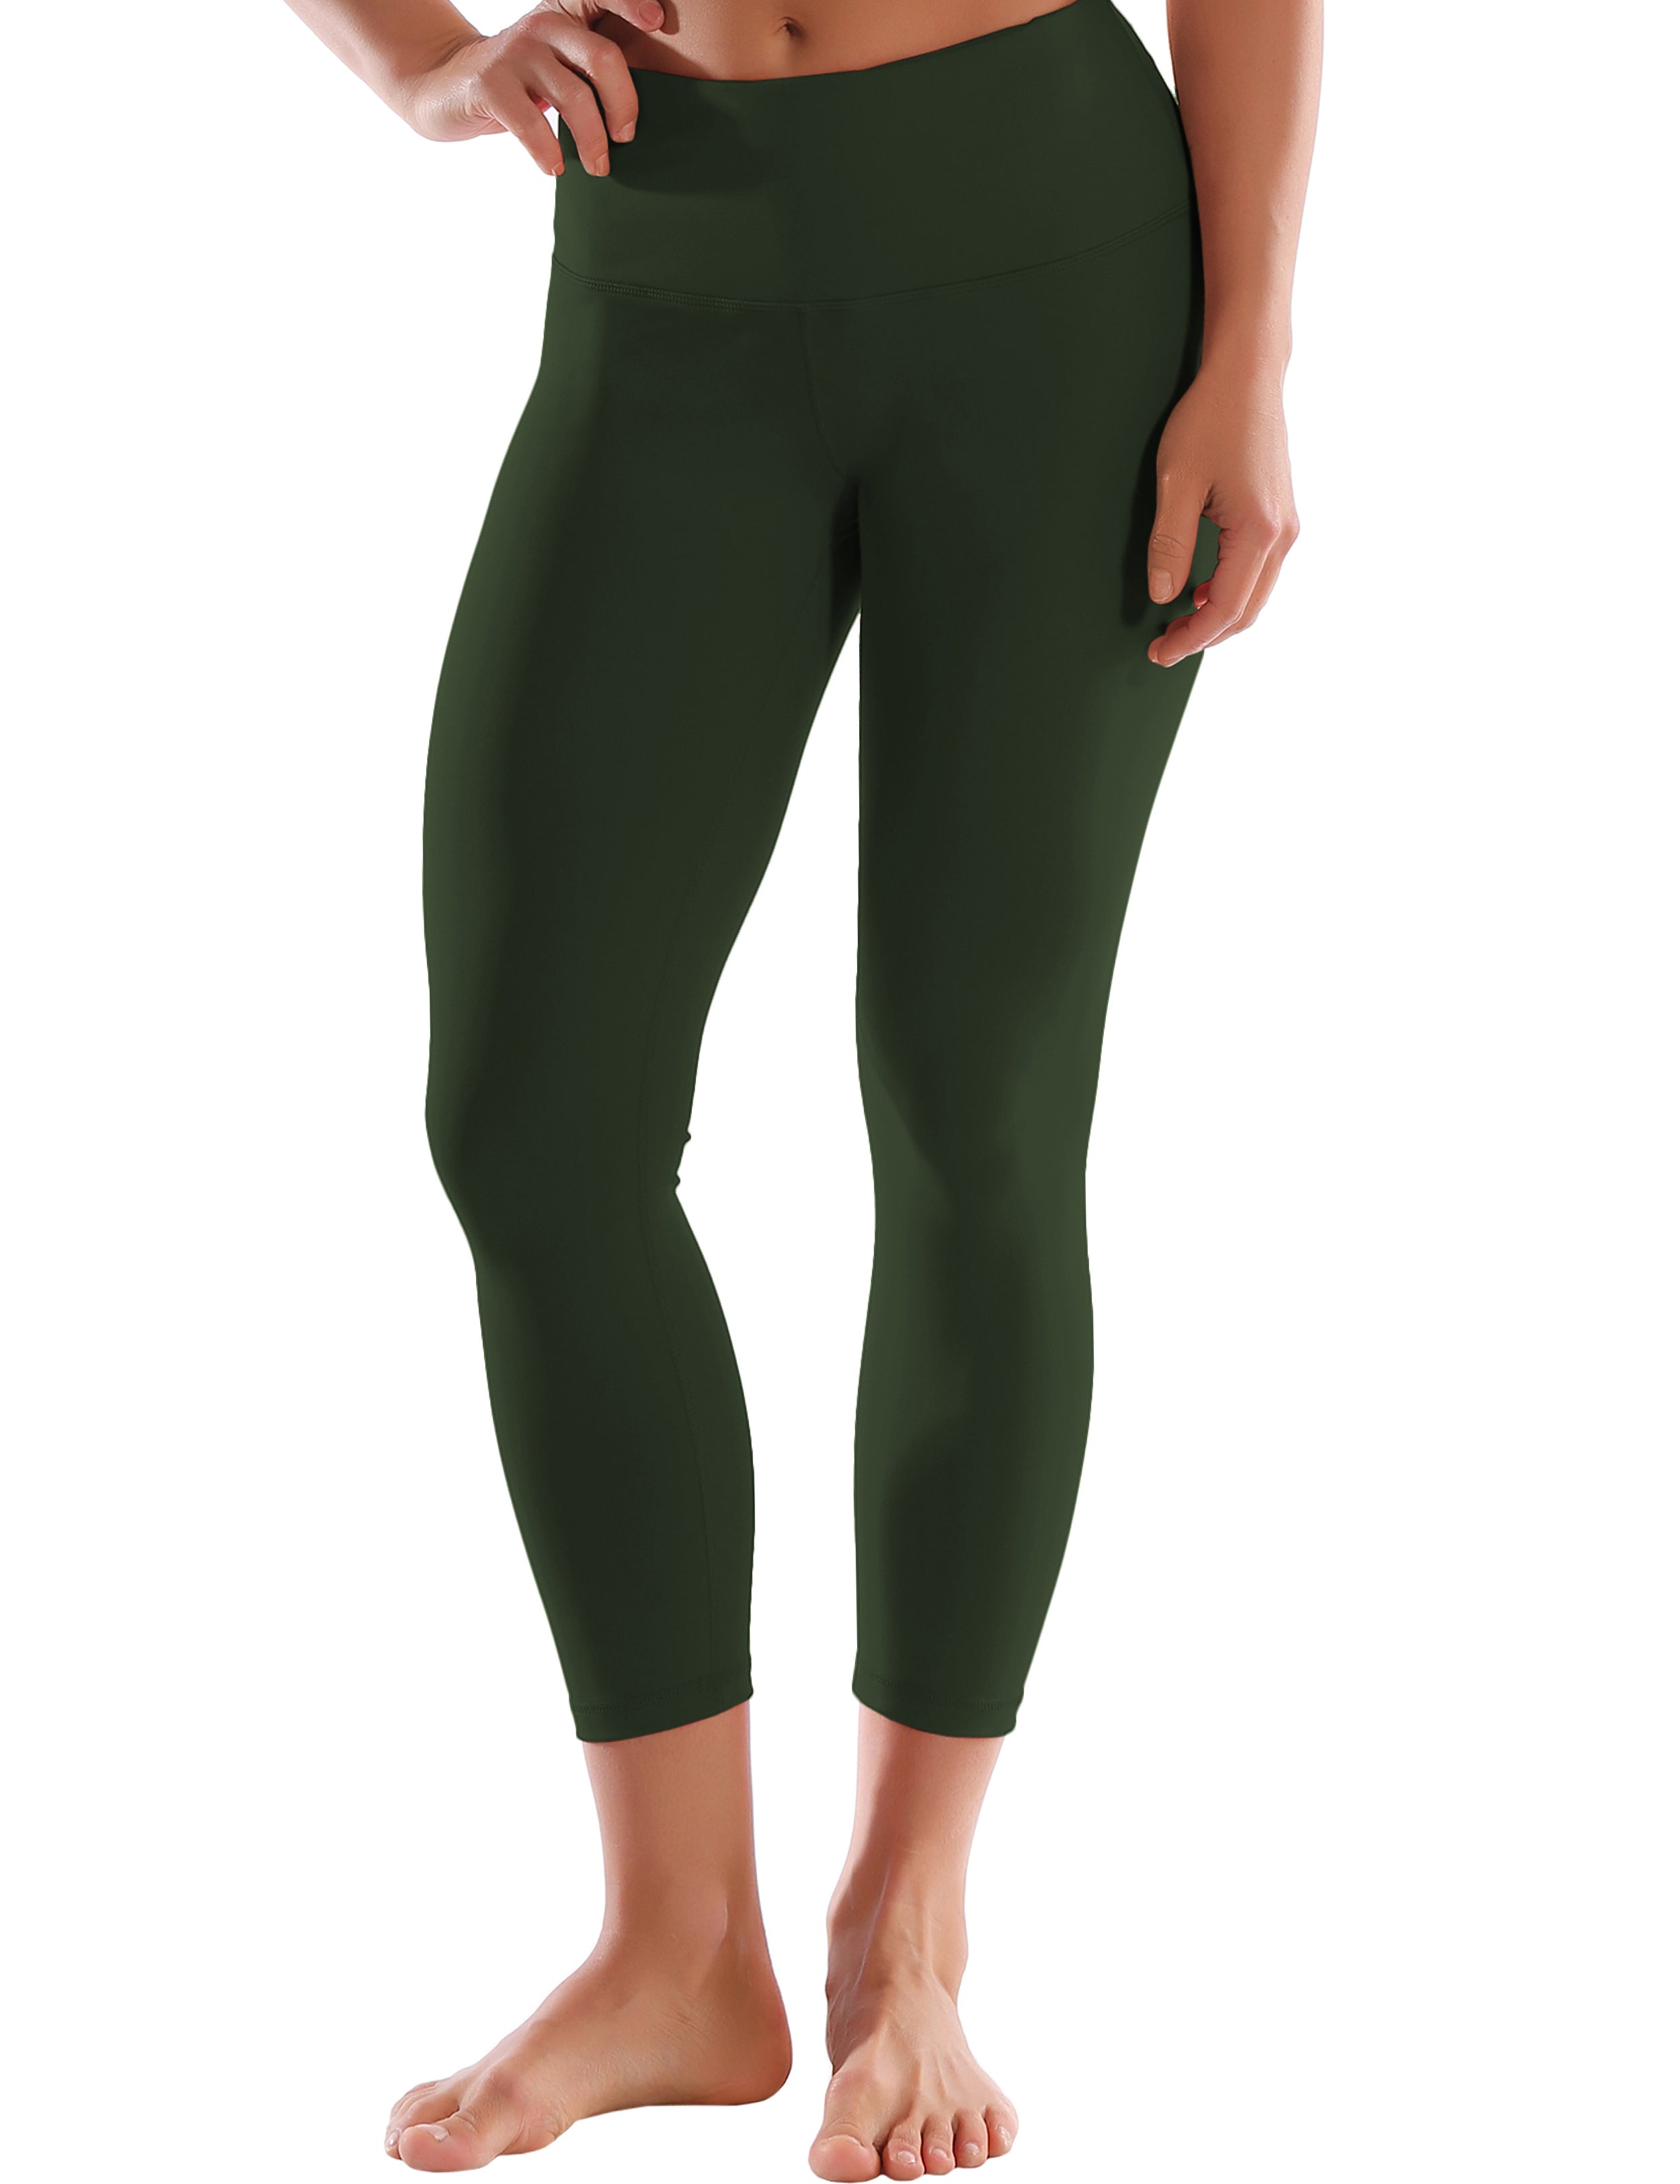 22" High Waist Crop Tight Capris olivegray 75%Nylon/25%Spandex Fabric doesn't attract lint easily 4-way stretch No see-through Moisture-wicking Tummy control Inner pocket